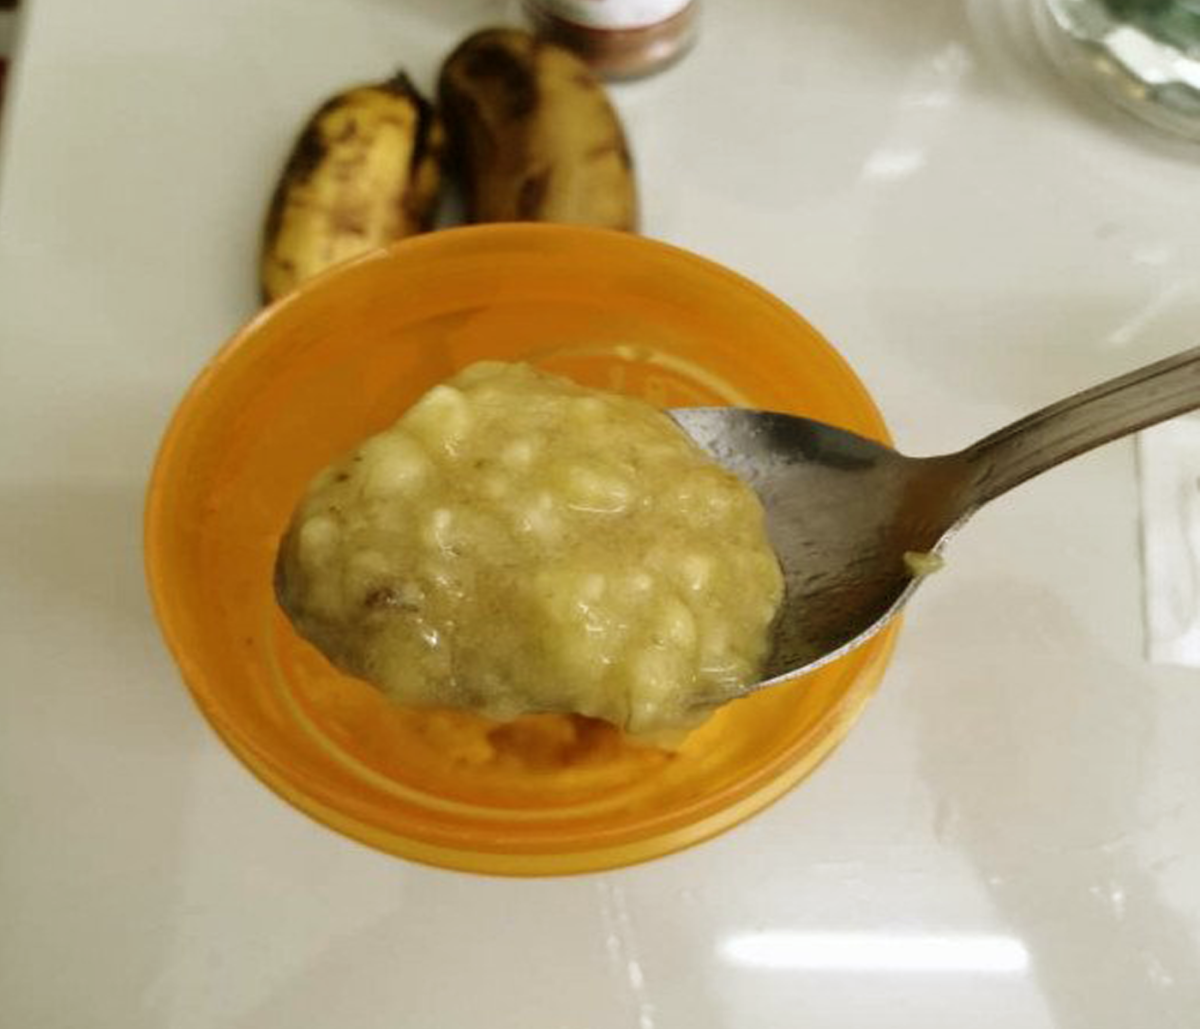 Mash the bananas but leave some chunks for added texture